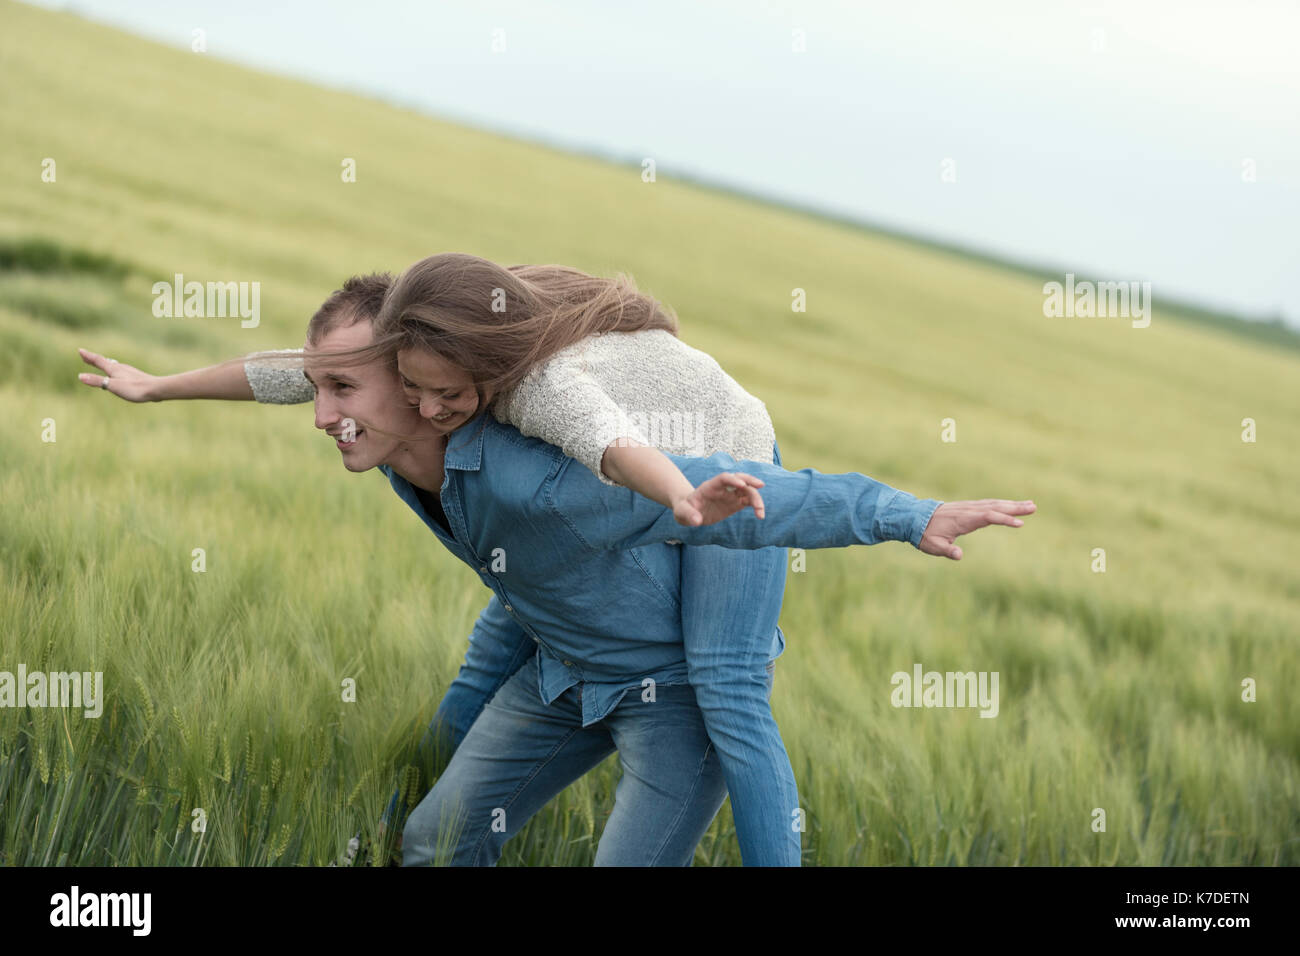 Cheerful couple with arms outstretched enjoying piggyback ride on grass field against sky Stock Photo